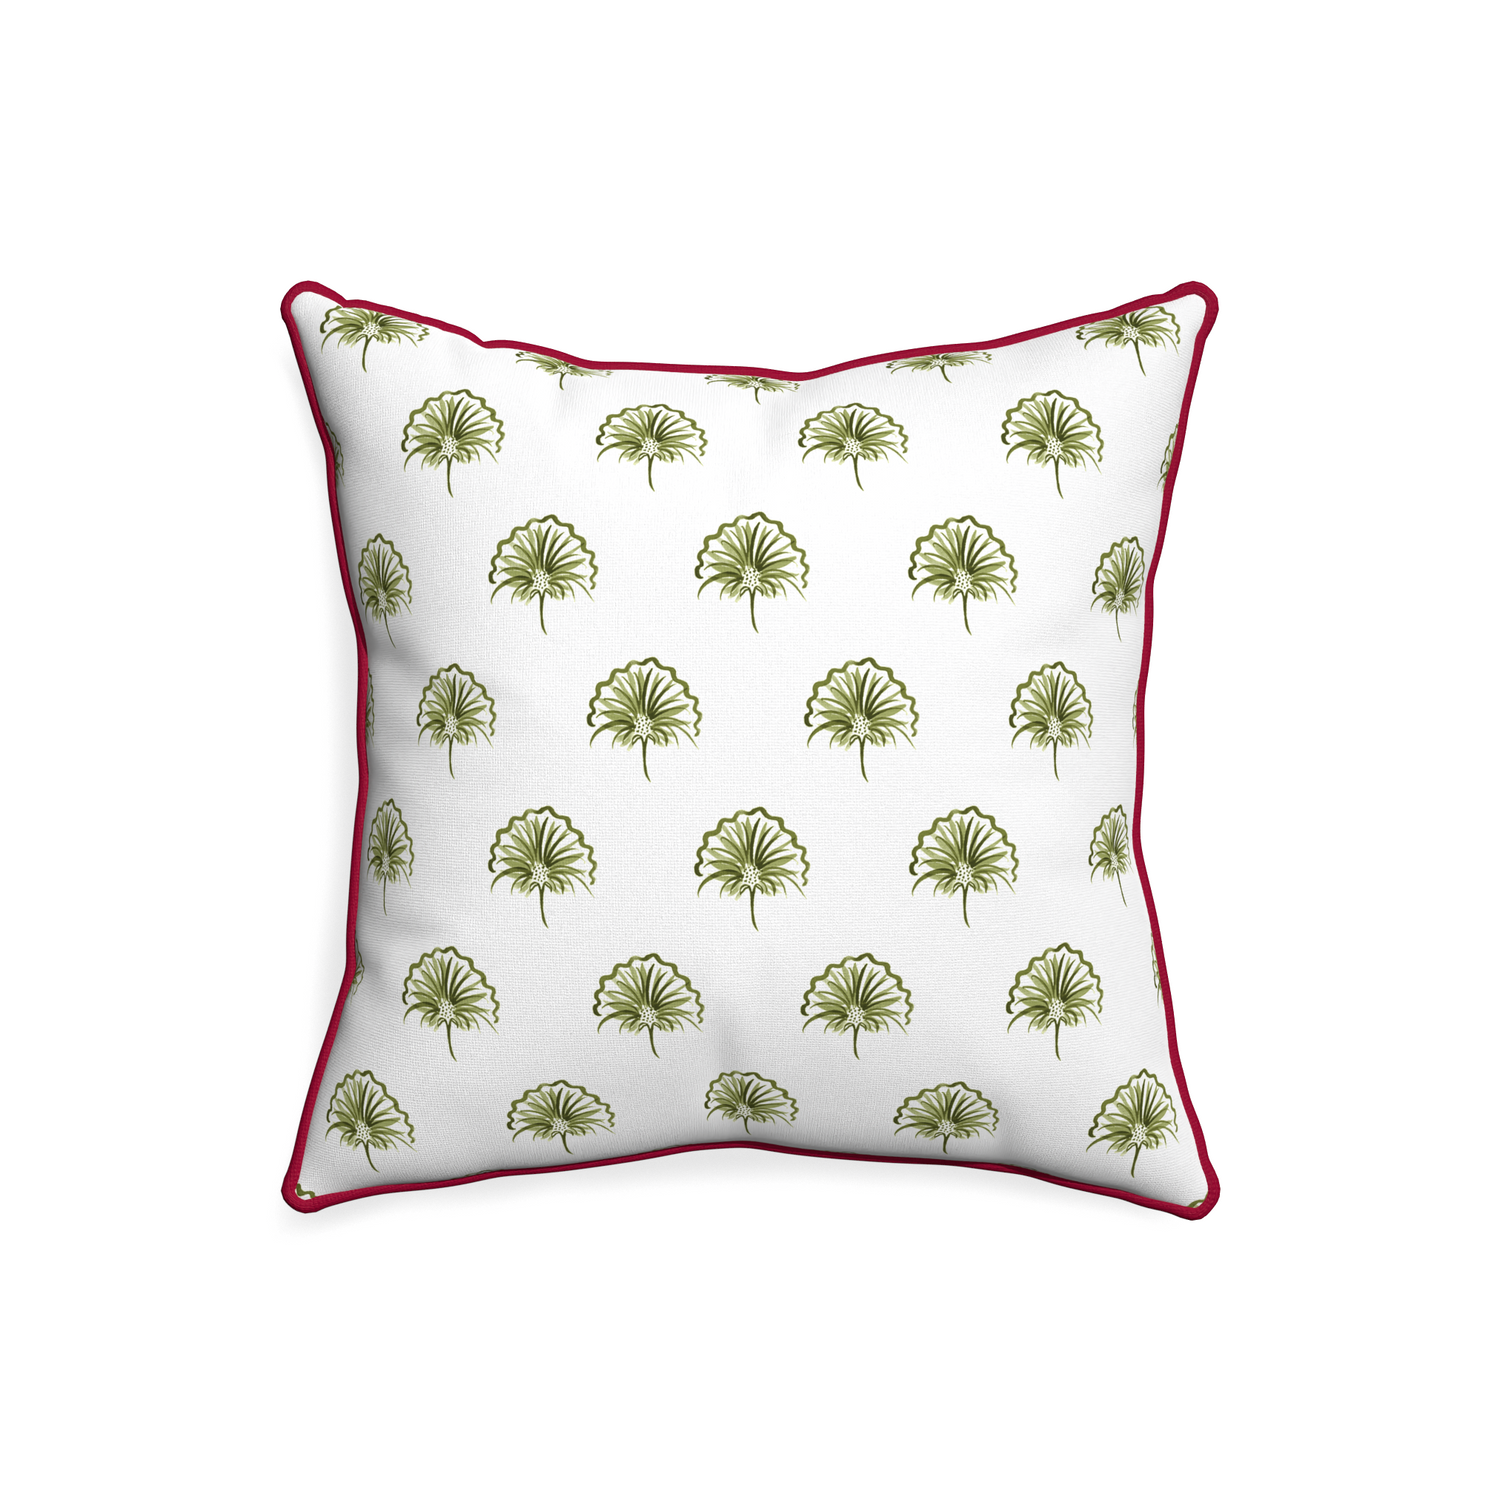 20-square penelope moss custom green floralpillow with raspberry piping on white background